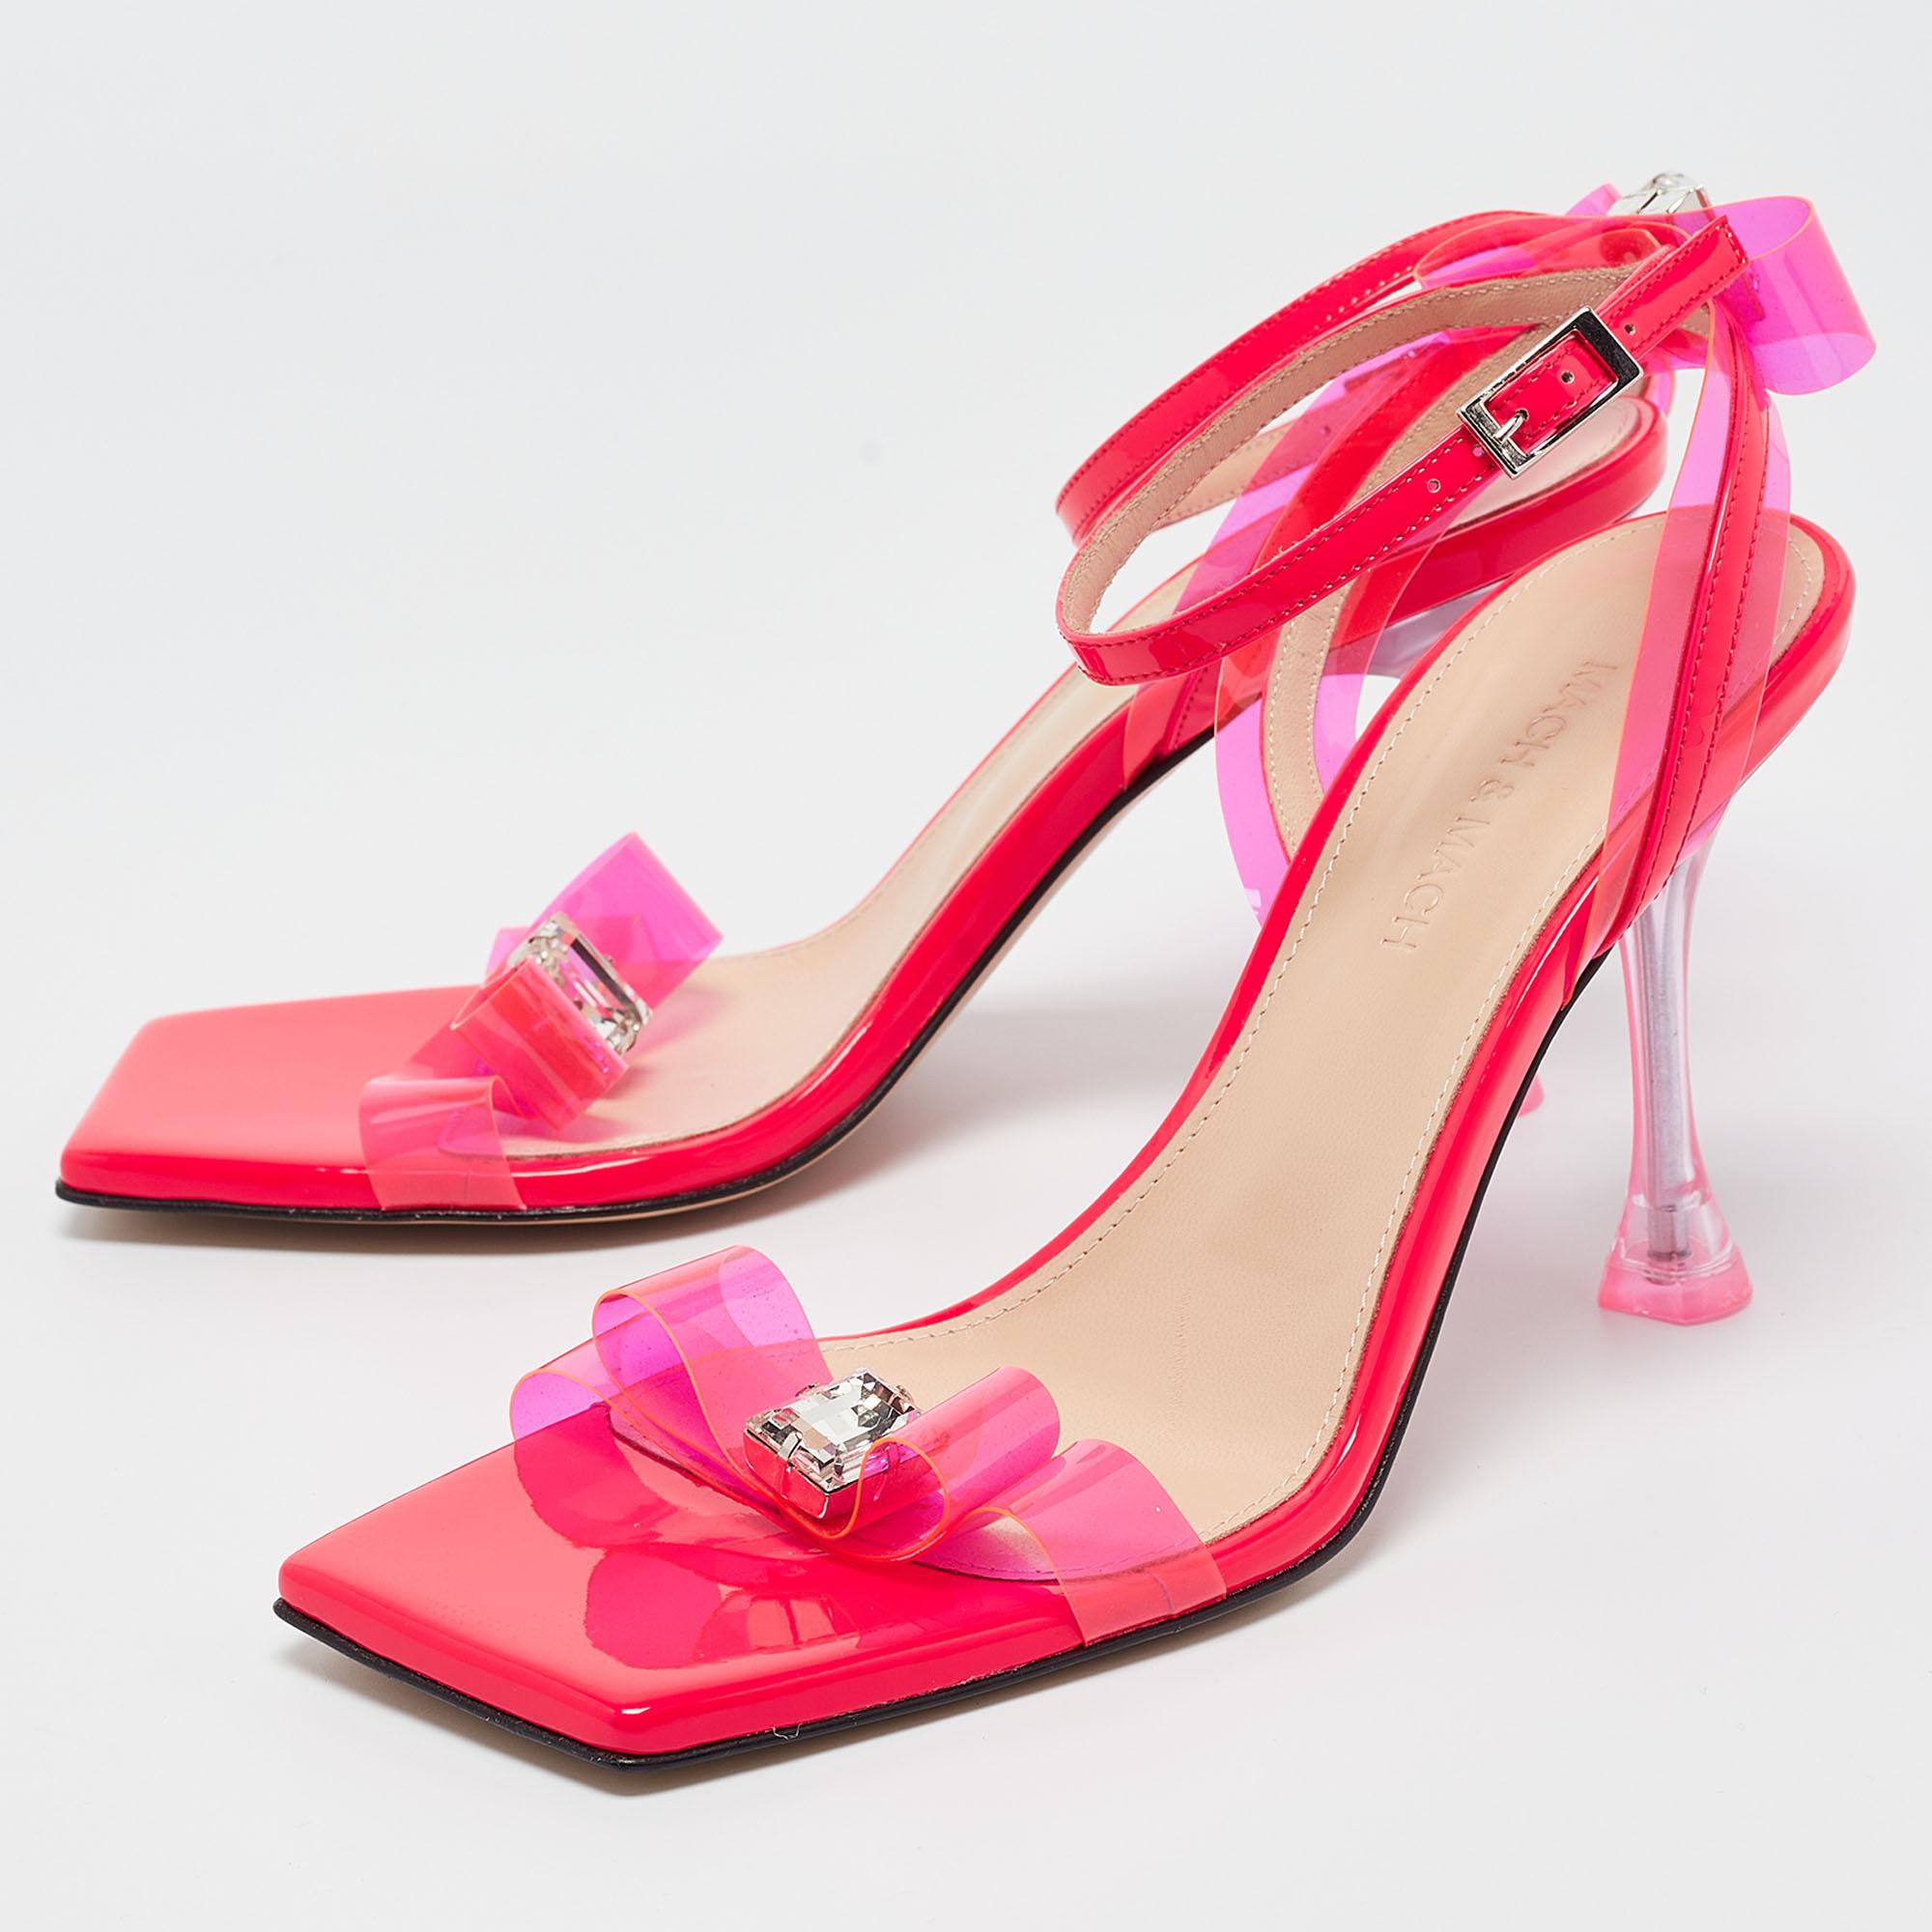 Mach & Mach Pink PVC and Patent French Bow Square Toe Sandals Size 39 For Sale 1